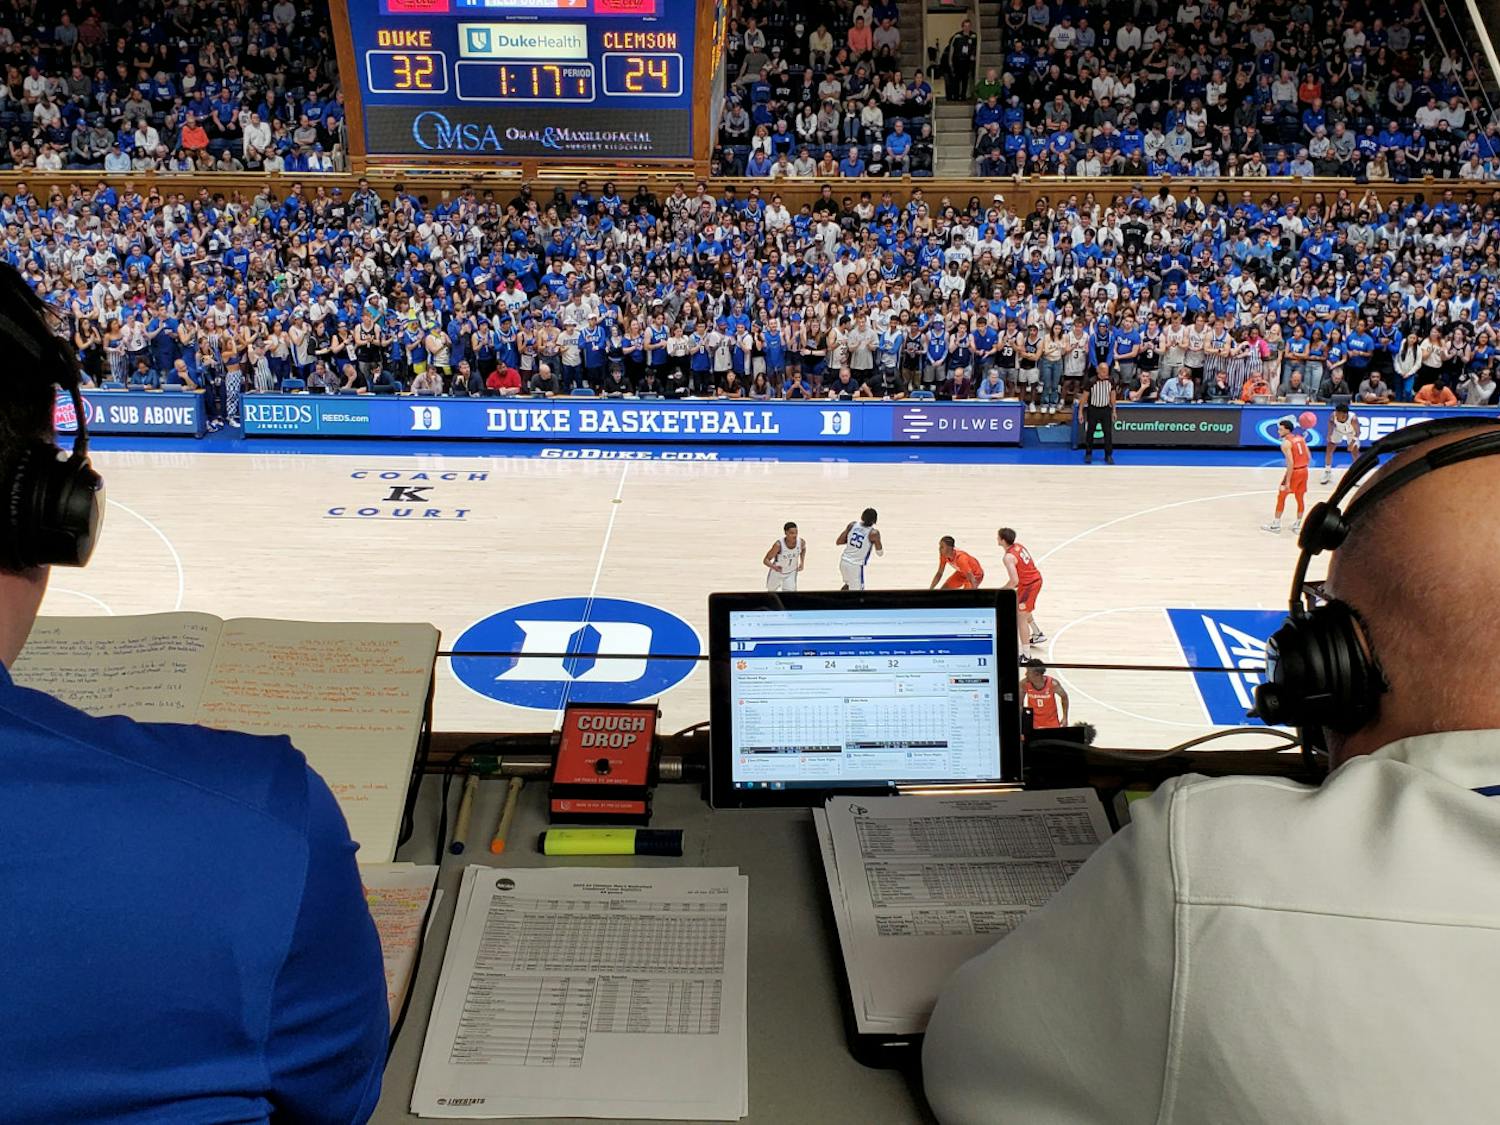 David Shumate (left) checks his notes in the broadcast booth during Duke's home game against Clemson.